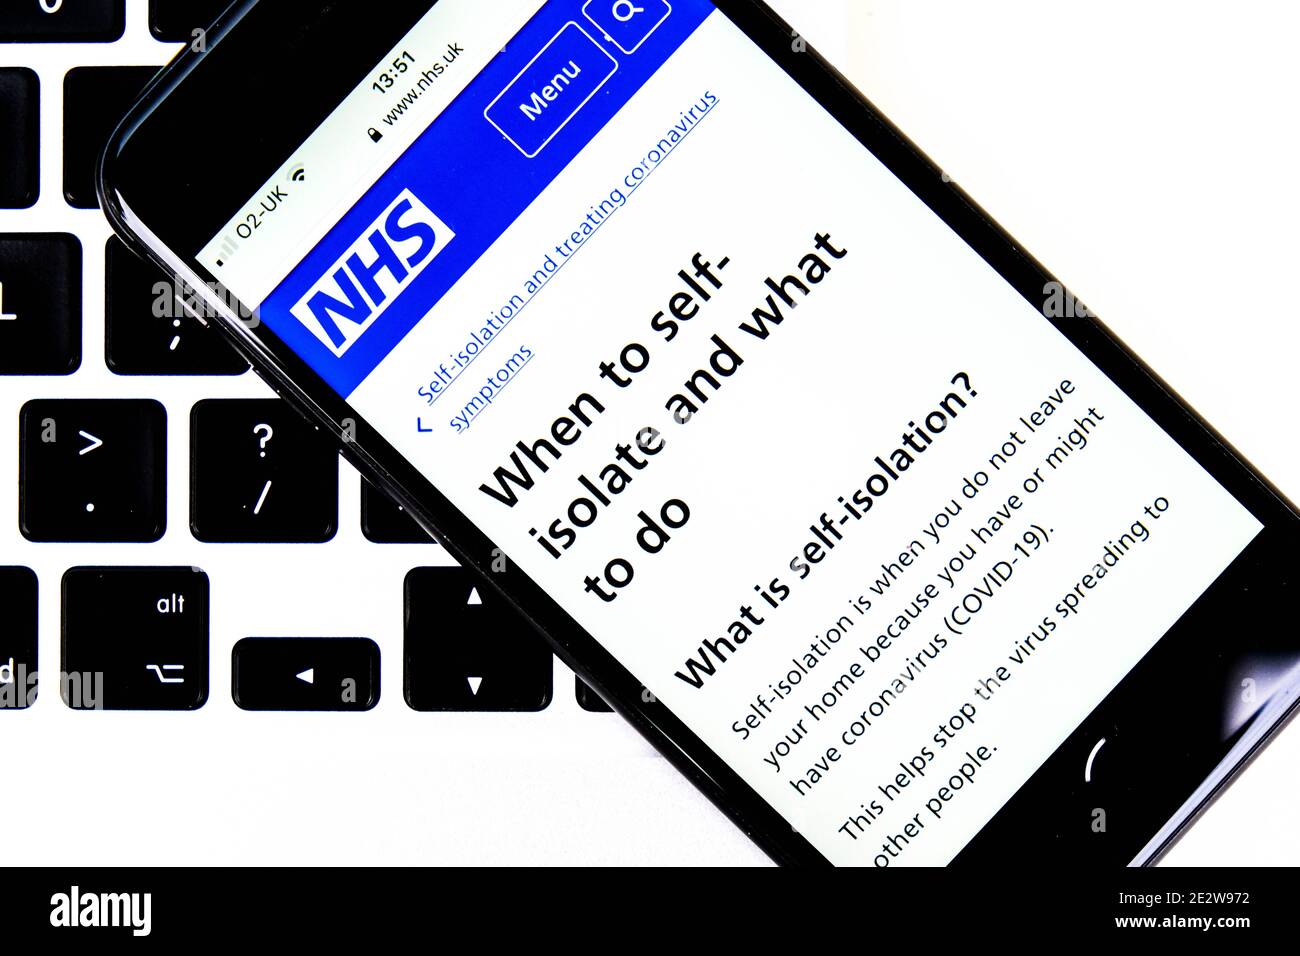 London UK, January 15 2021, Mobile Phone Or Smartphone Screenshot, NHS When To Self-Isolate During Covid-19 Pandemic Stock Photo